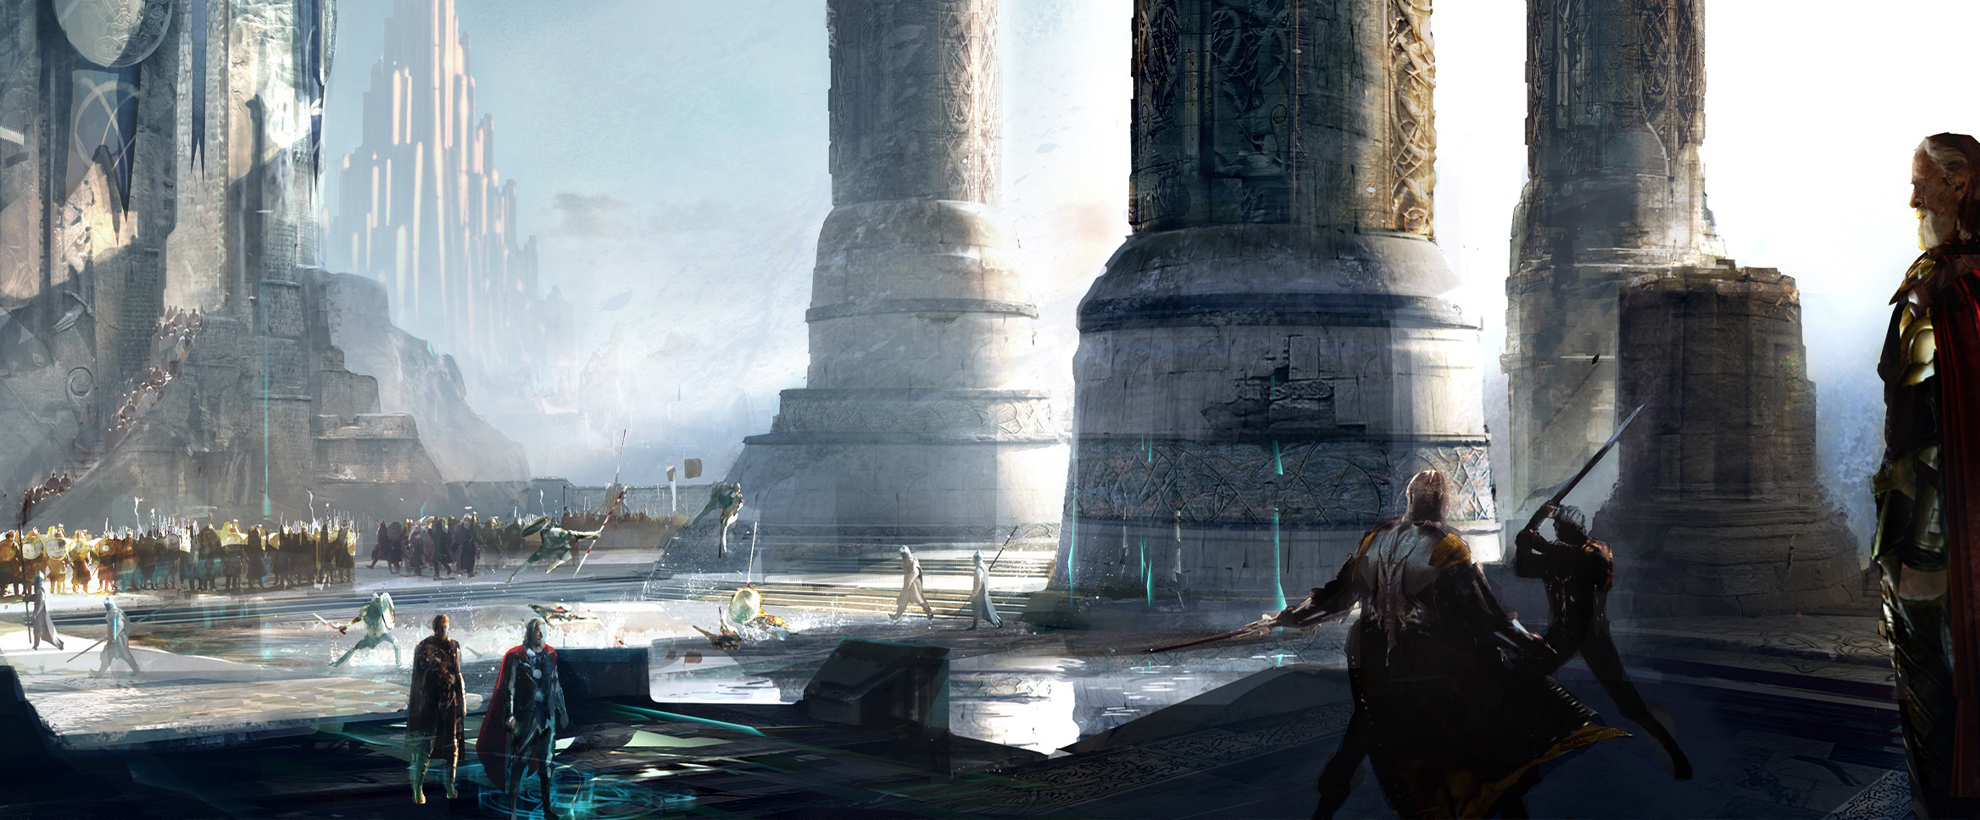 Concept art of Asgard's city, with large ornate pillars